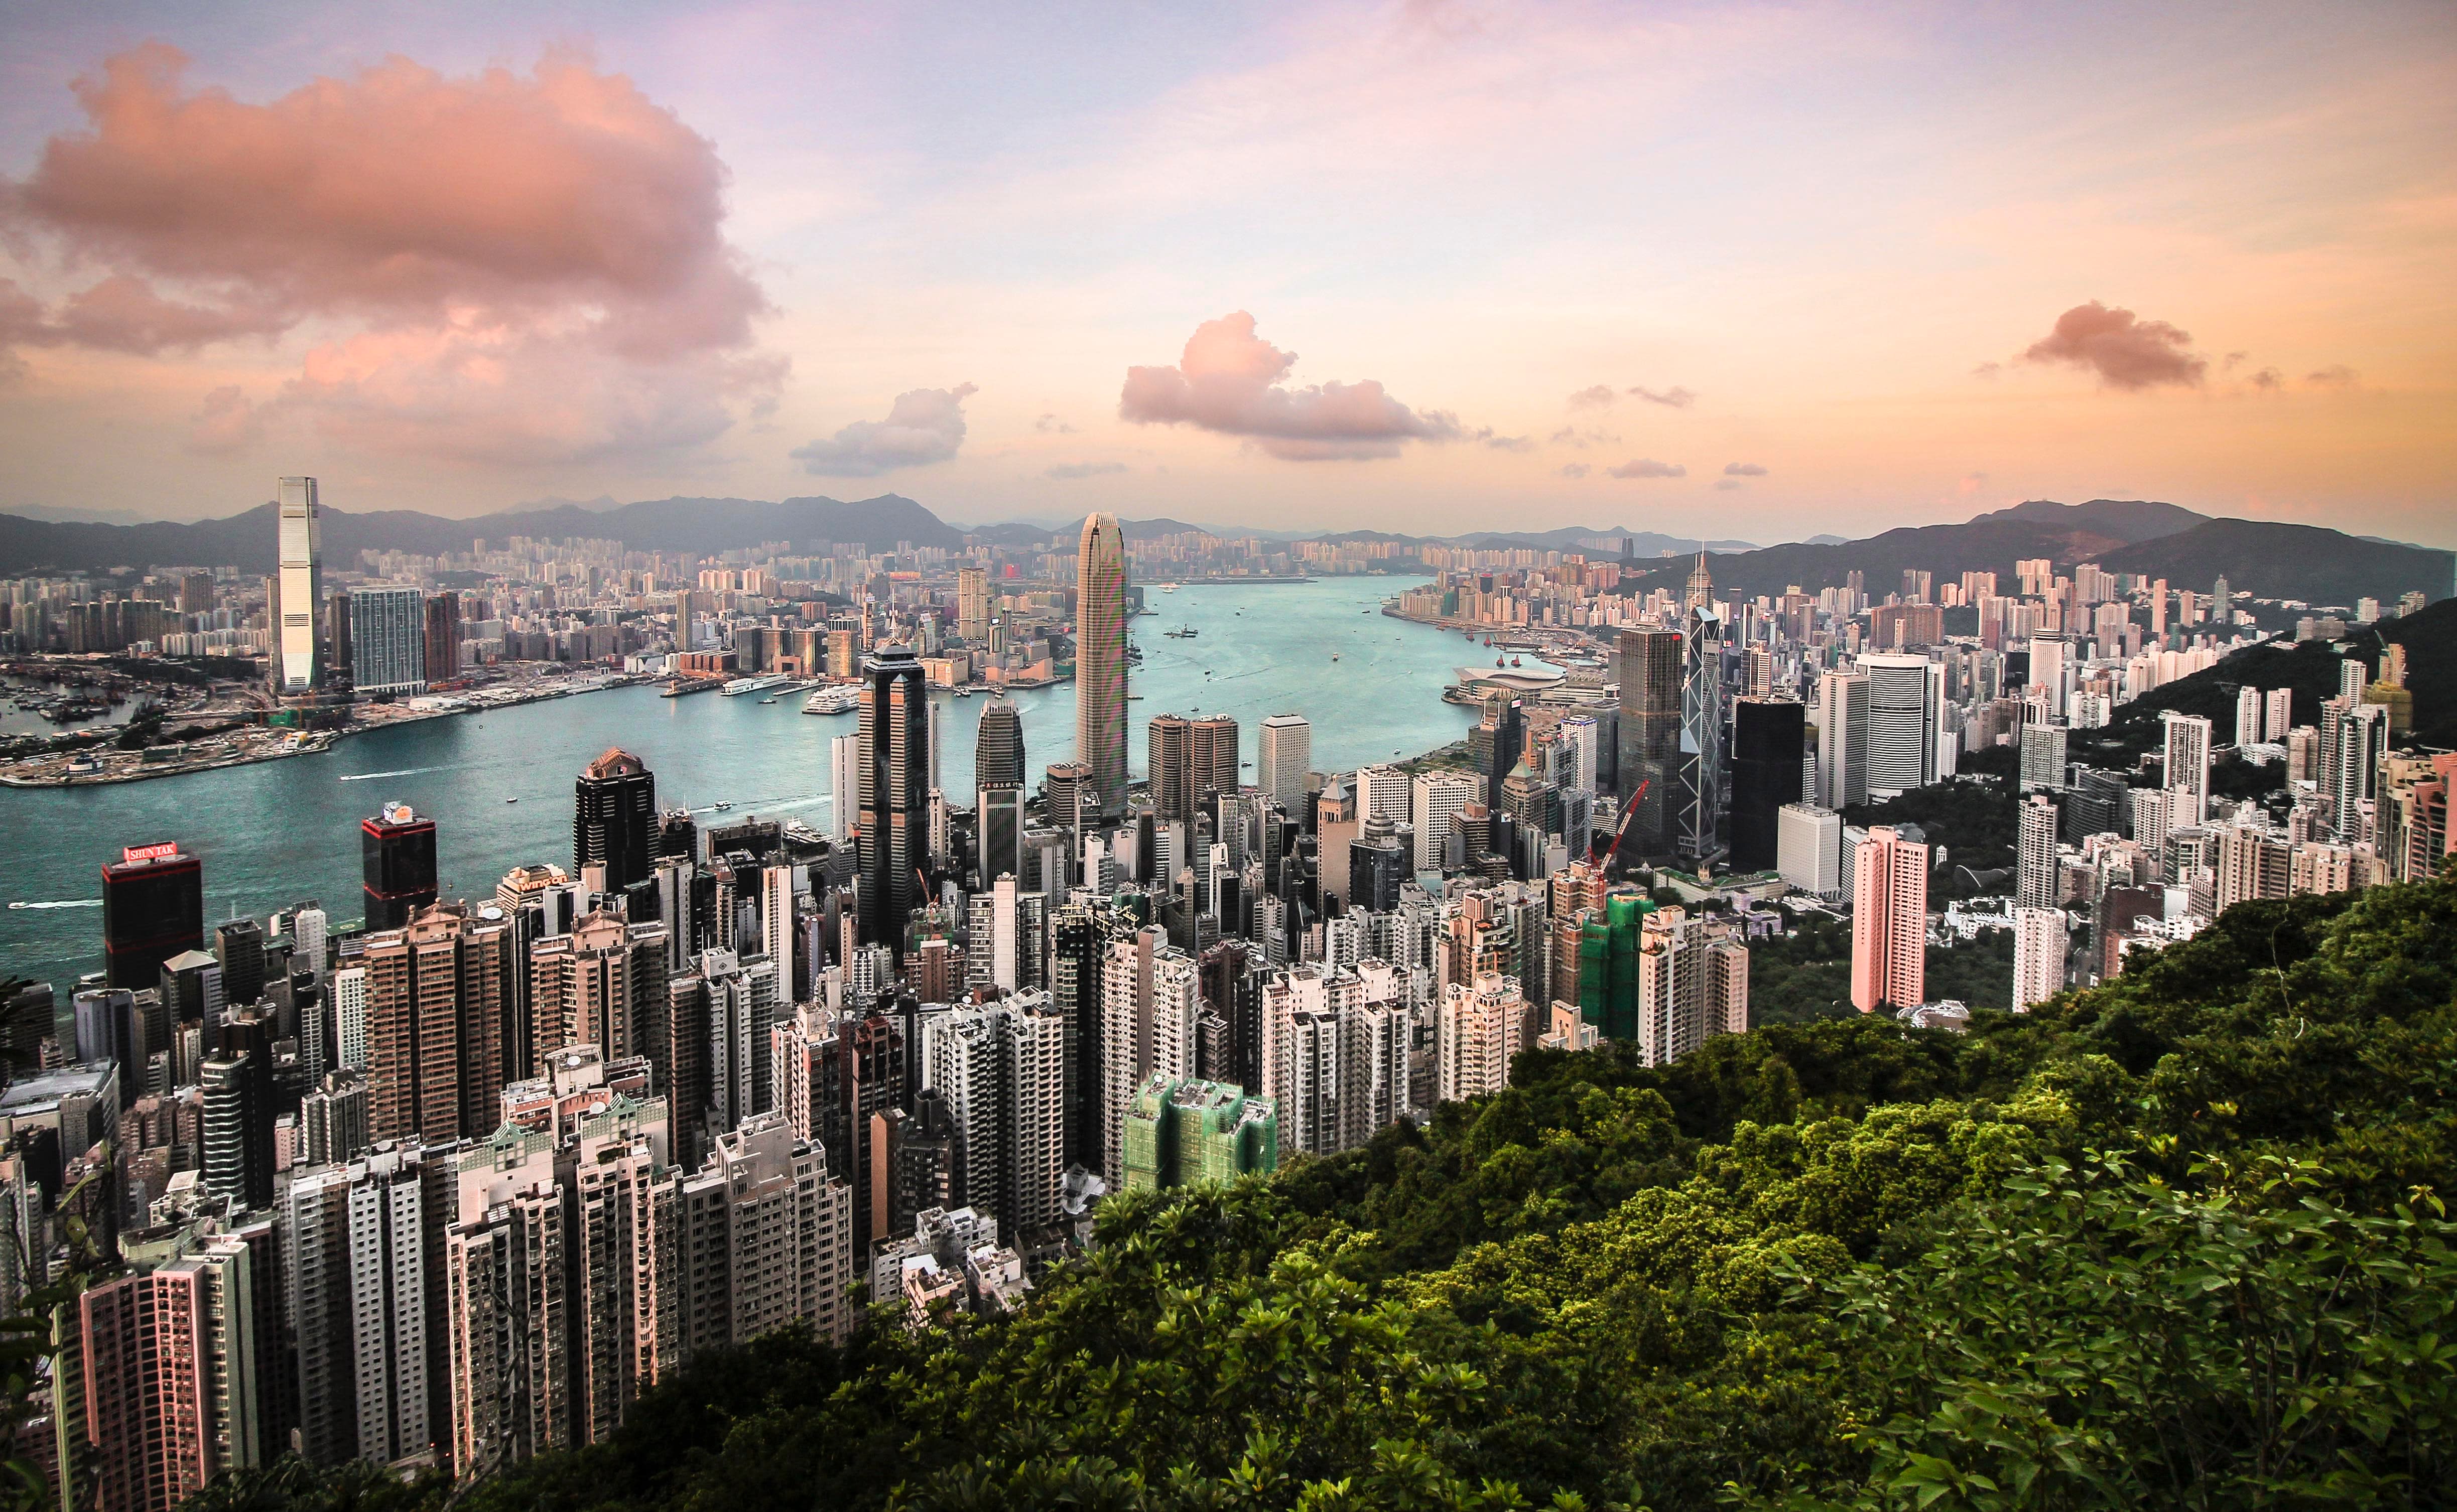 IG-Worthy Hongkong Hotels Under $150/Night With Flexible Booking Policies —  Book When You Travel Under The S'pore-HK Air Travel Bubble